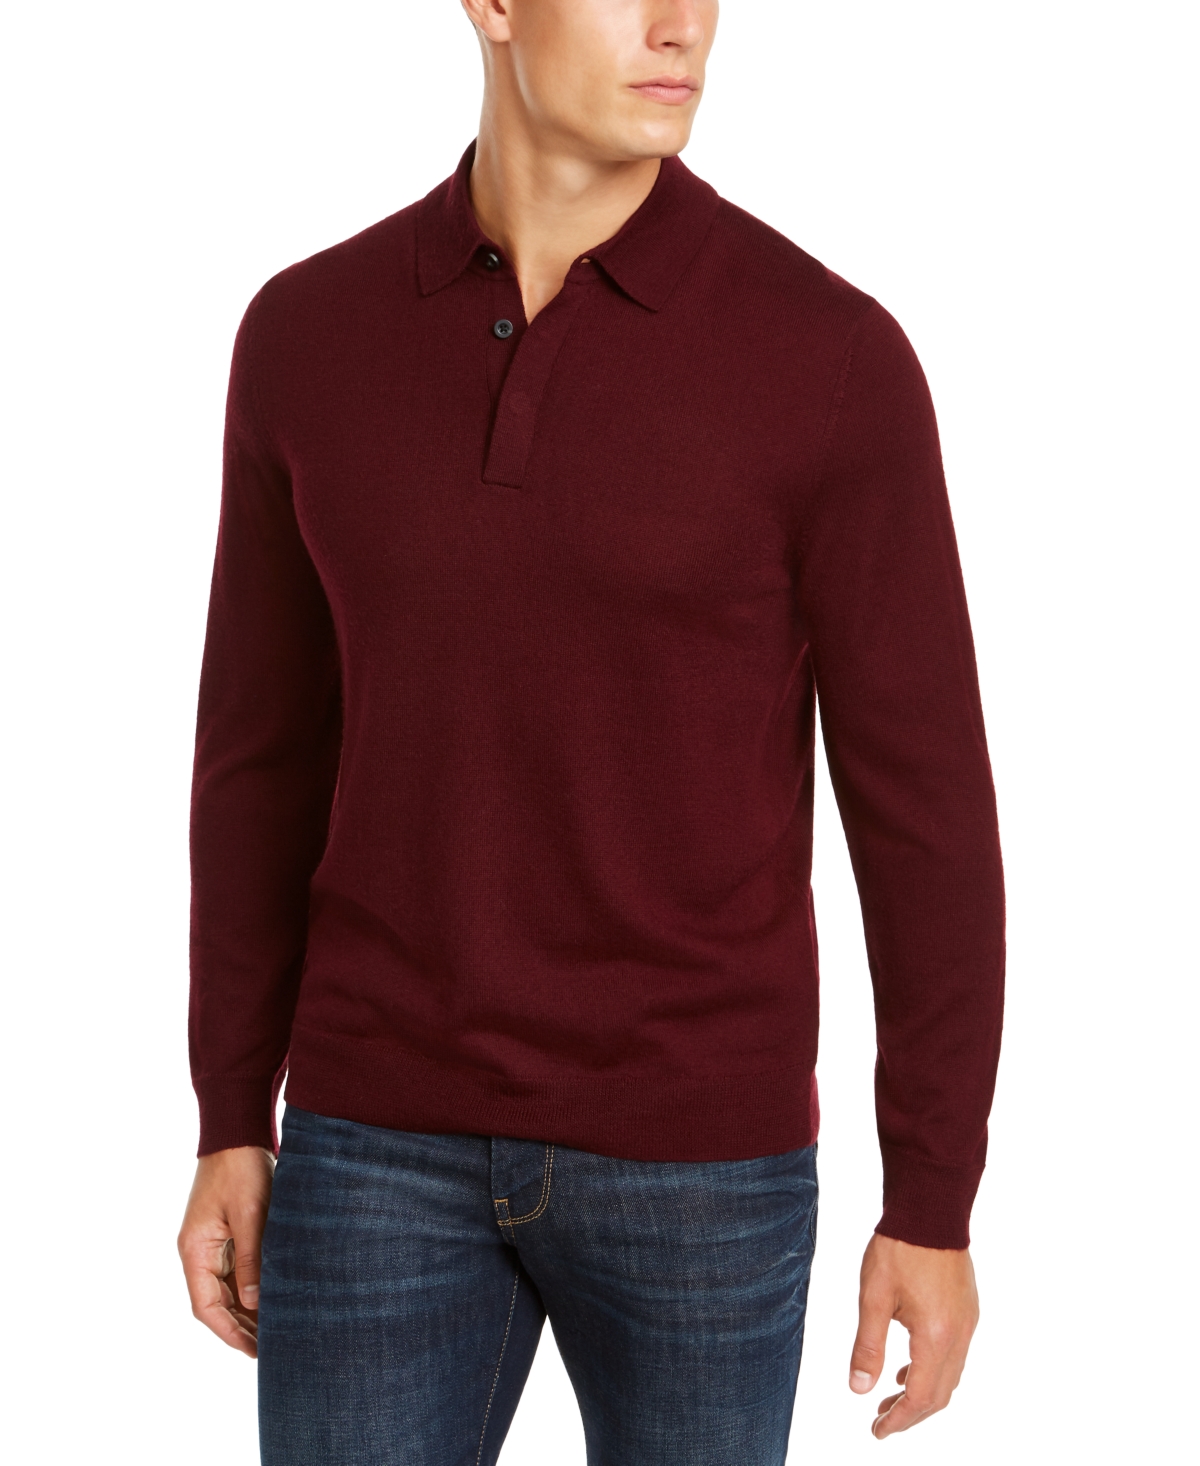 Men's Merino Wool Blend Polo Sweater, Created for Macy's - Red Plum